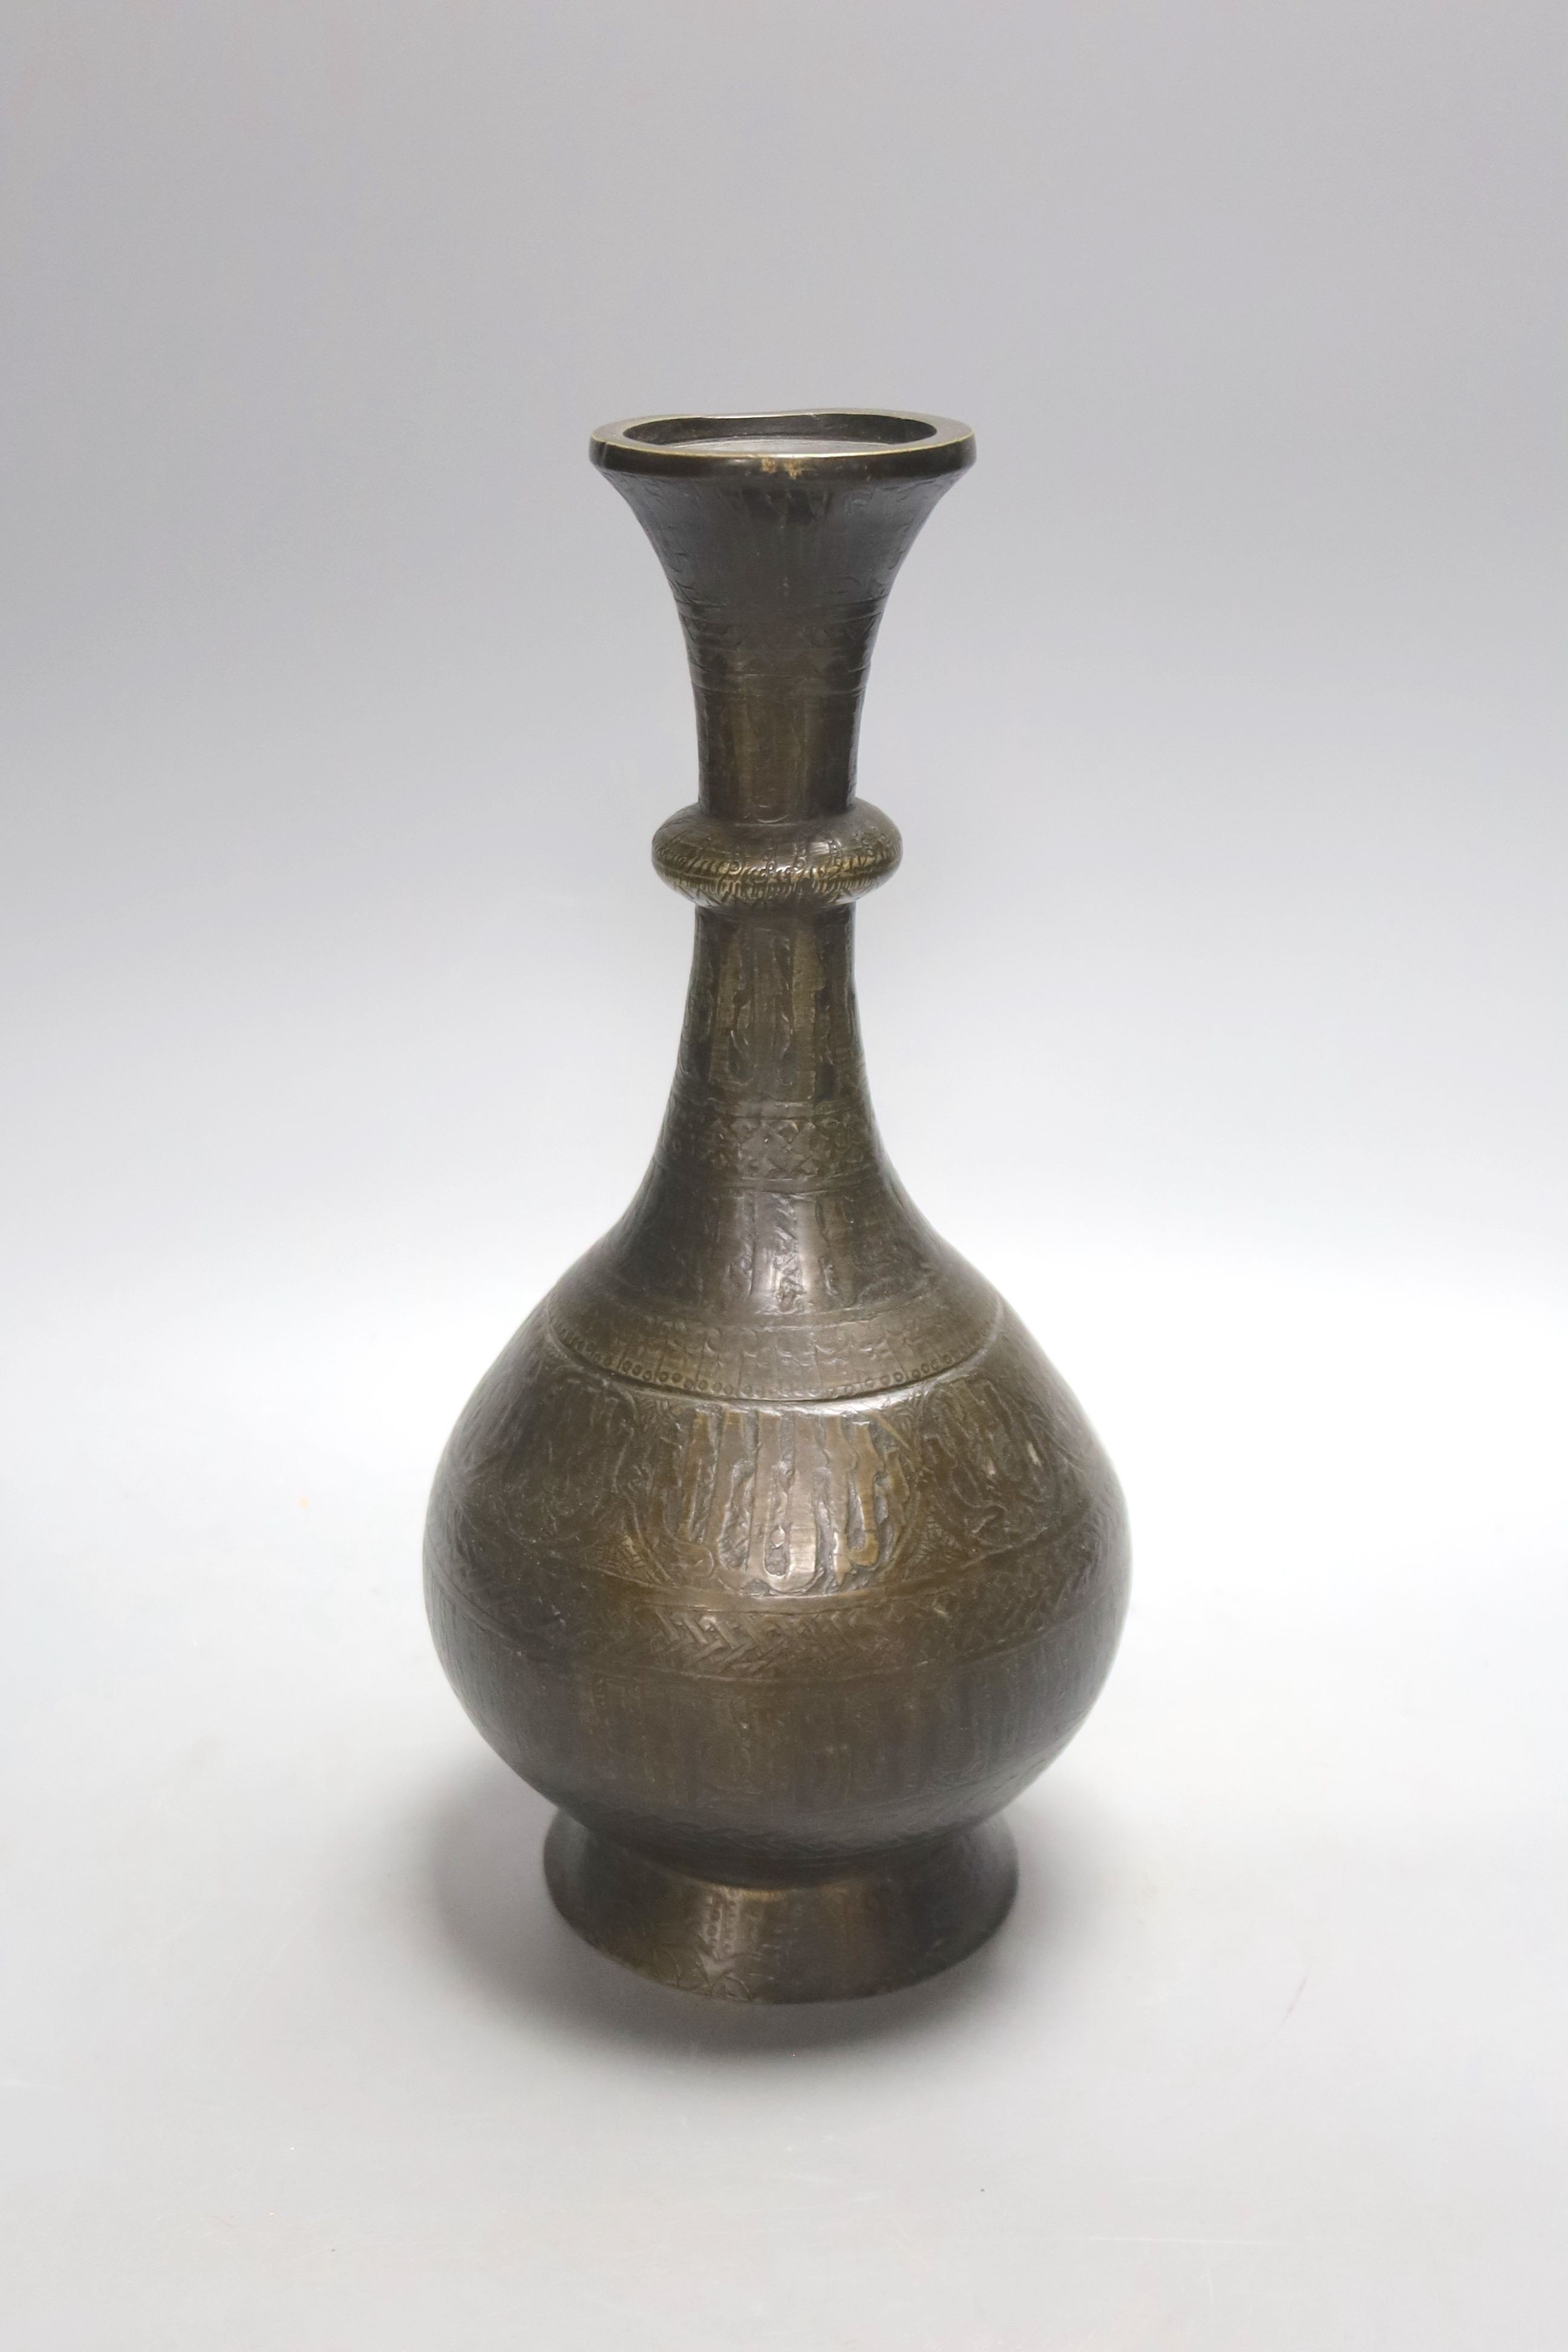 A Middle Eastern Islamic bronze vase, 28 cms high.